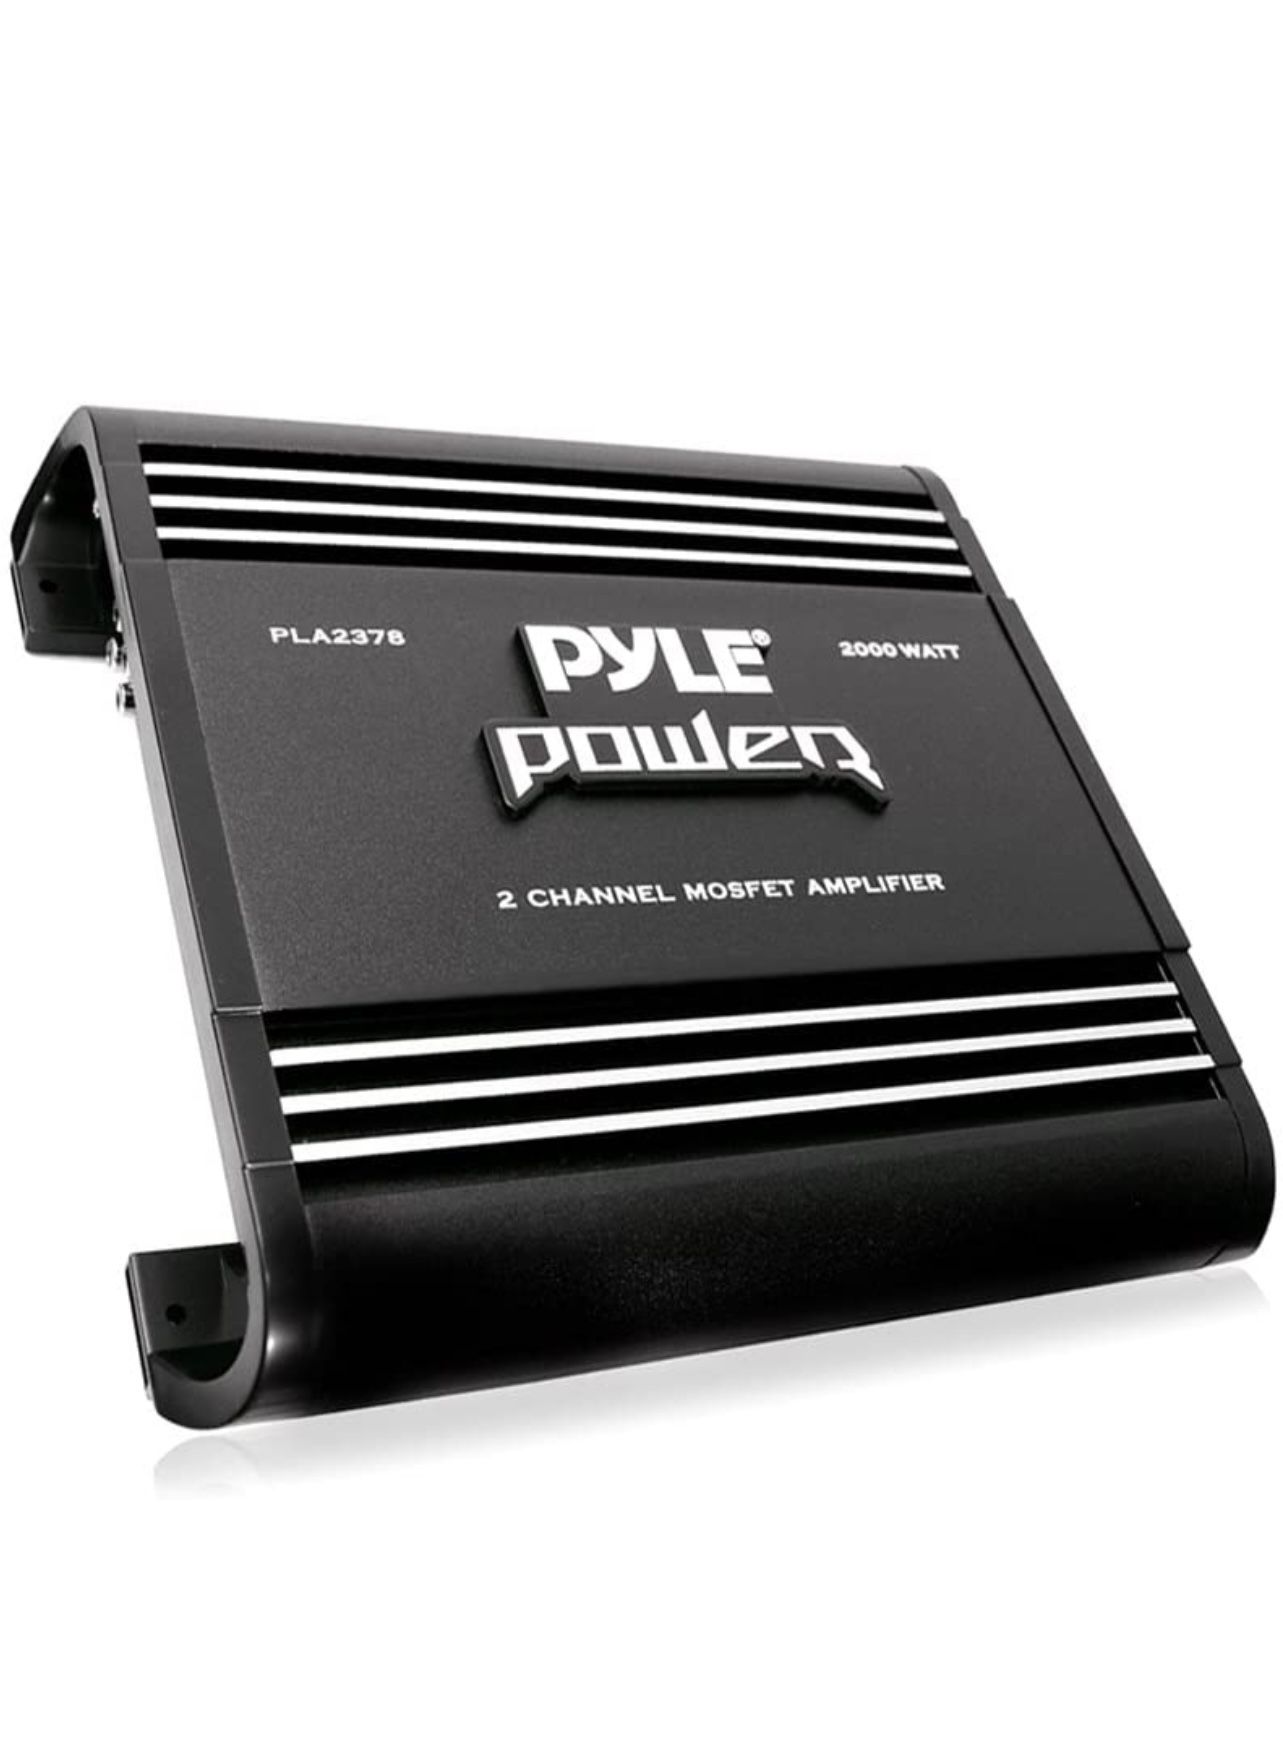 New Pyle PLA2378 2 Channel 2000 Watts Bridgeable Mosfet Amplifier Car Audio Amp Brand New